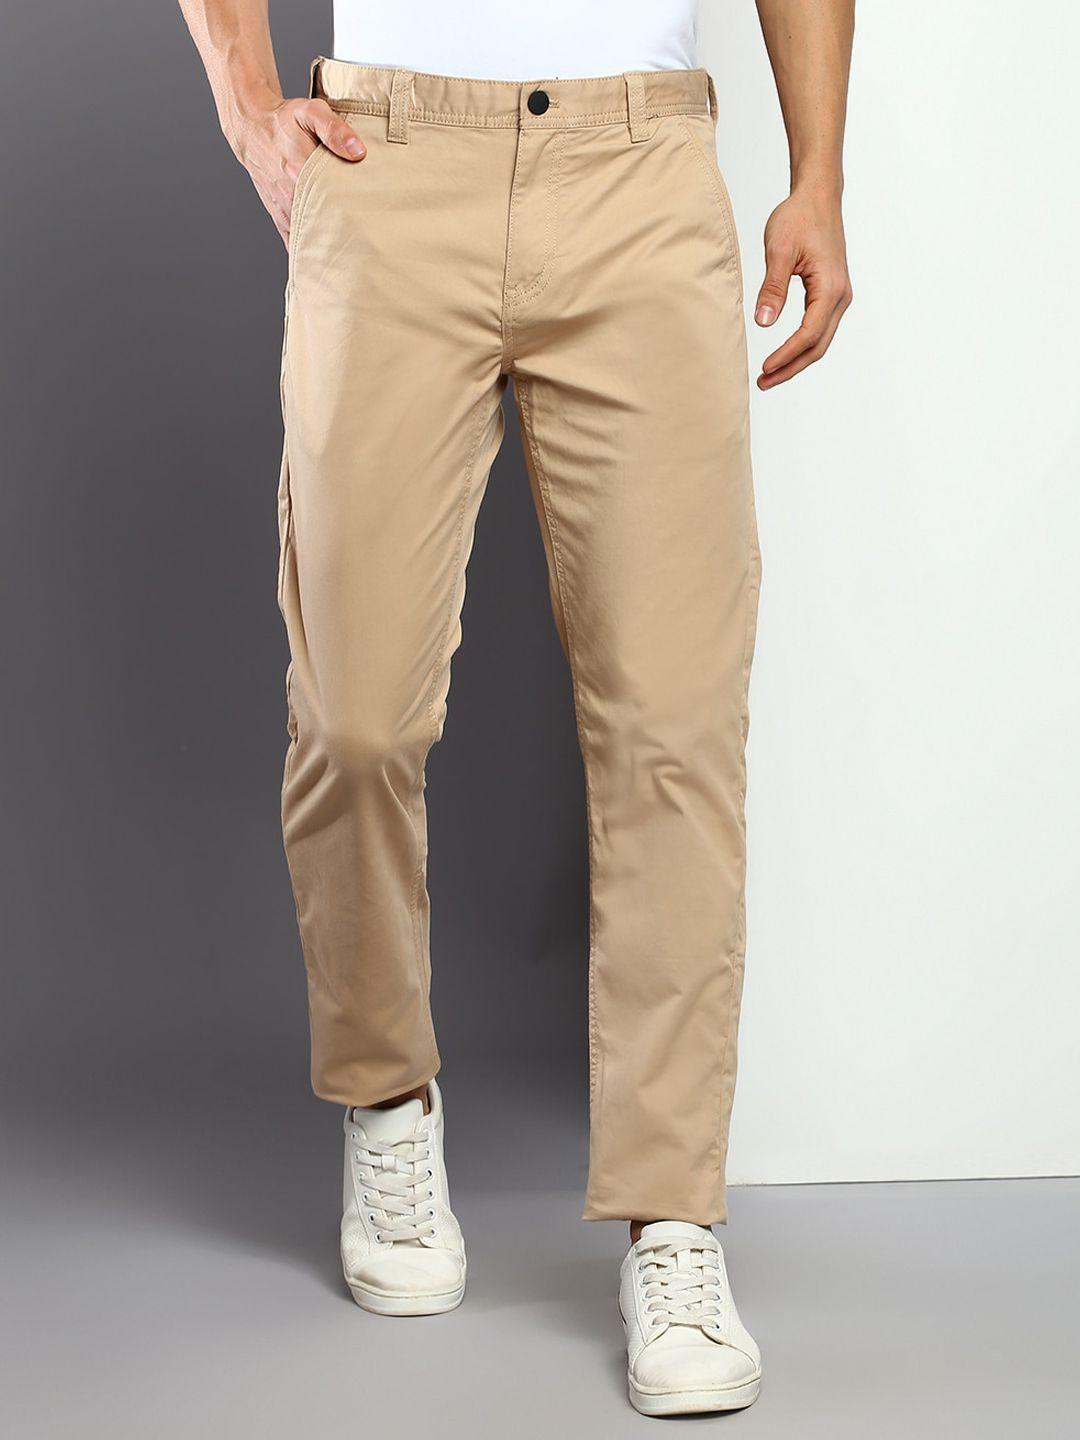 calvin klein jeans men skinny fit cotton chinos trousers